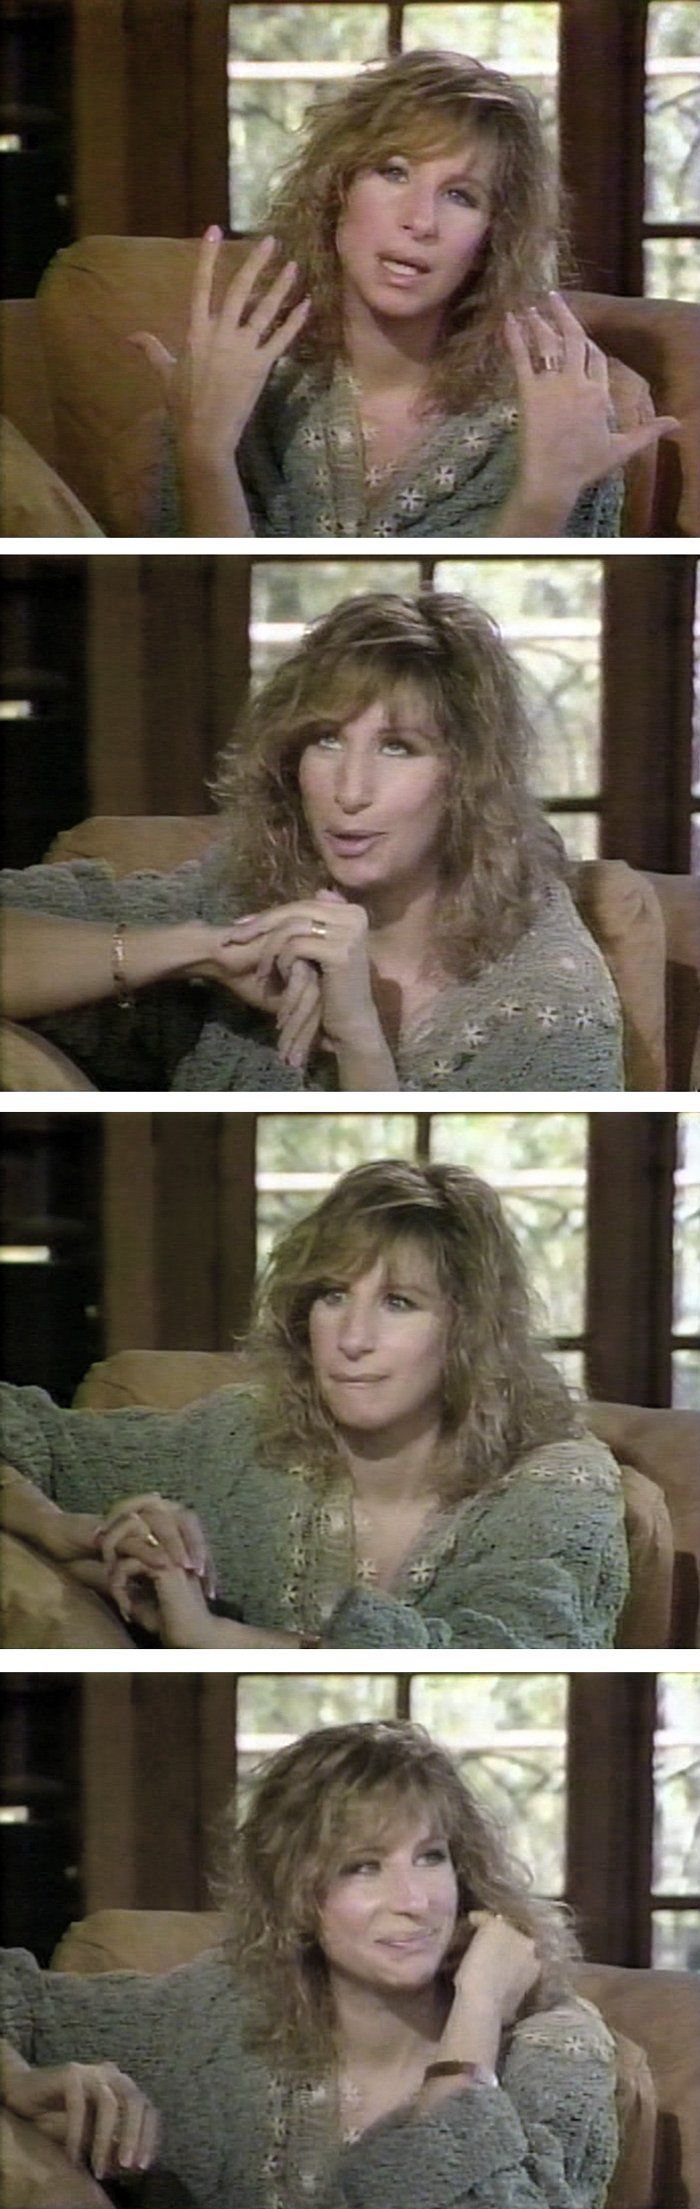 Streisand's reactions to Barbara Walter's questions during their 1985 interview.